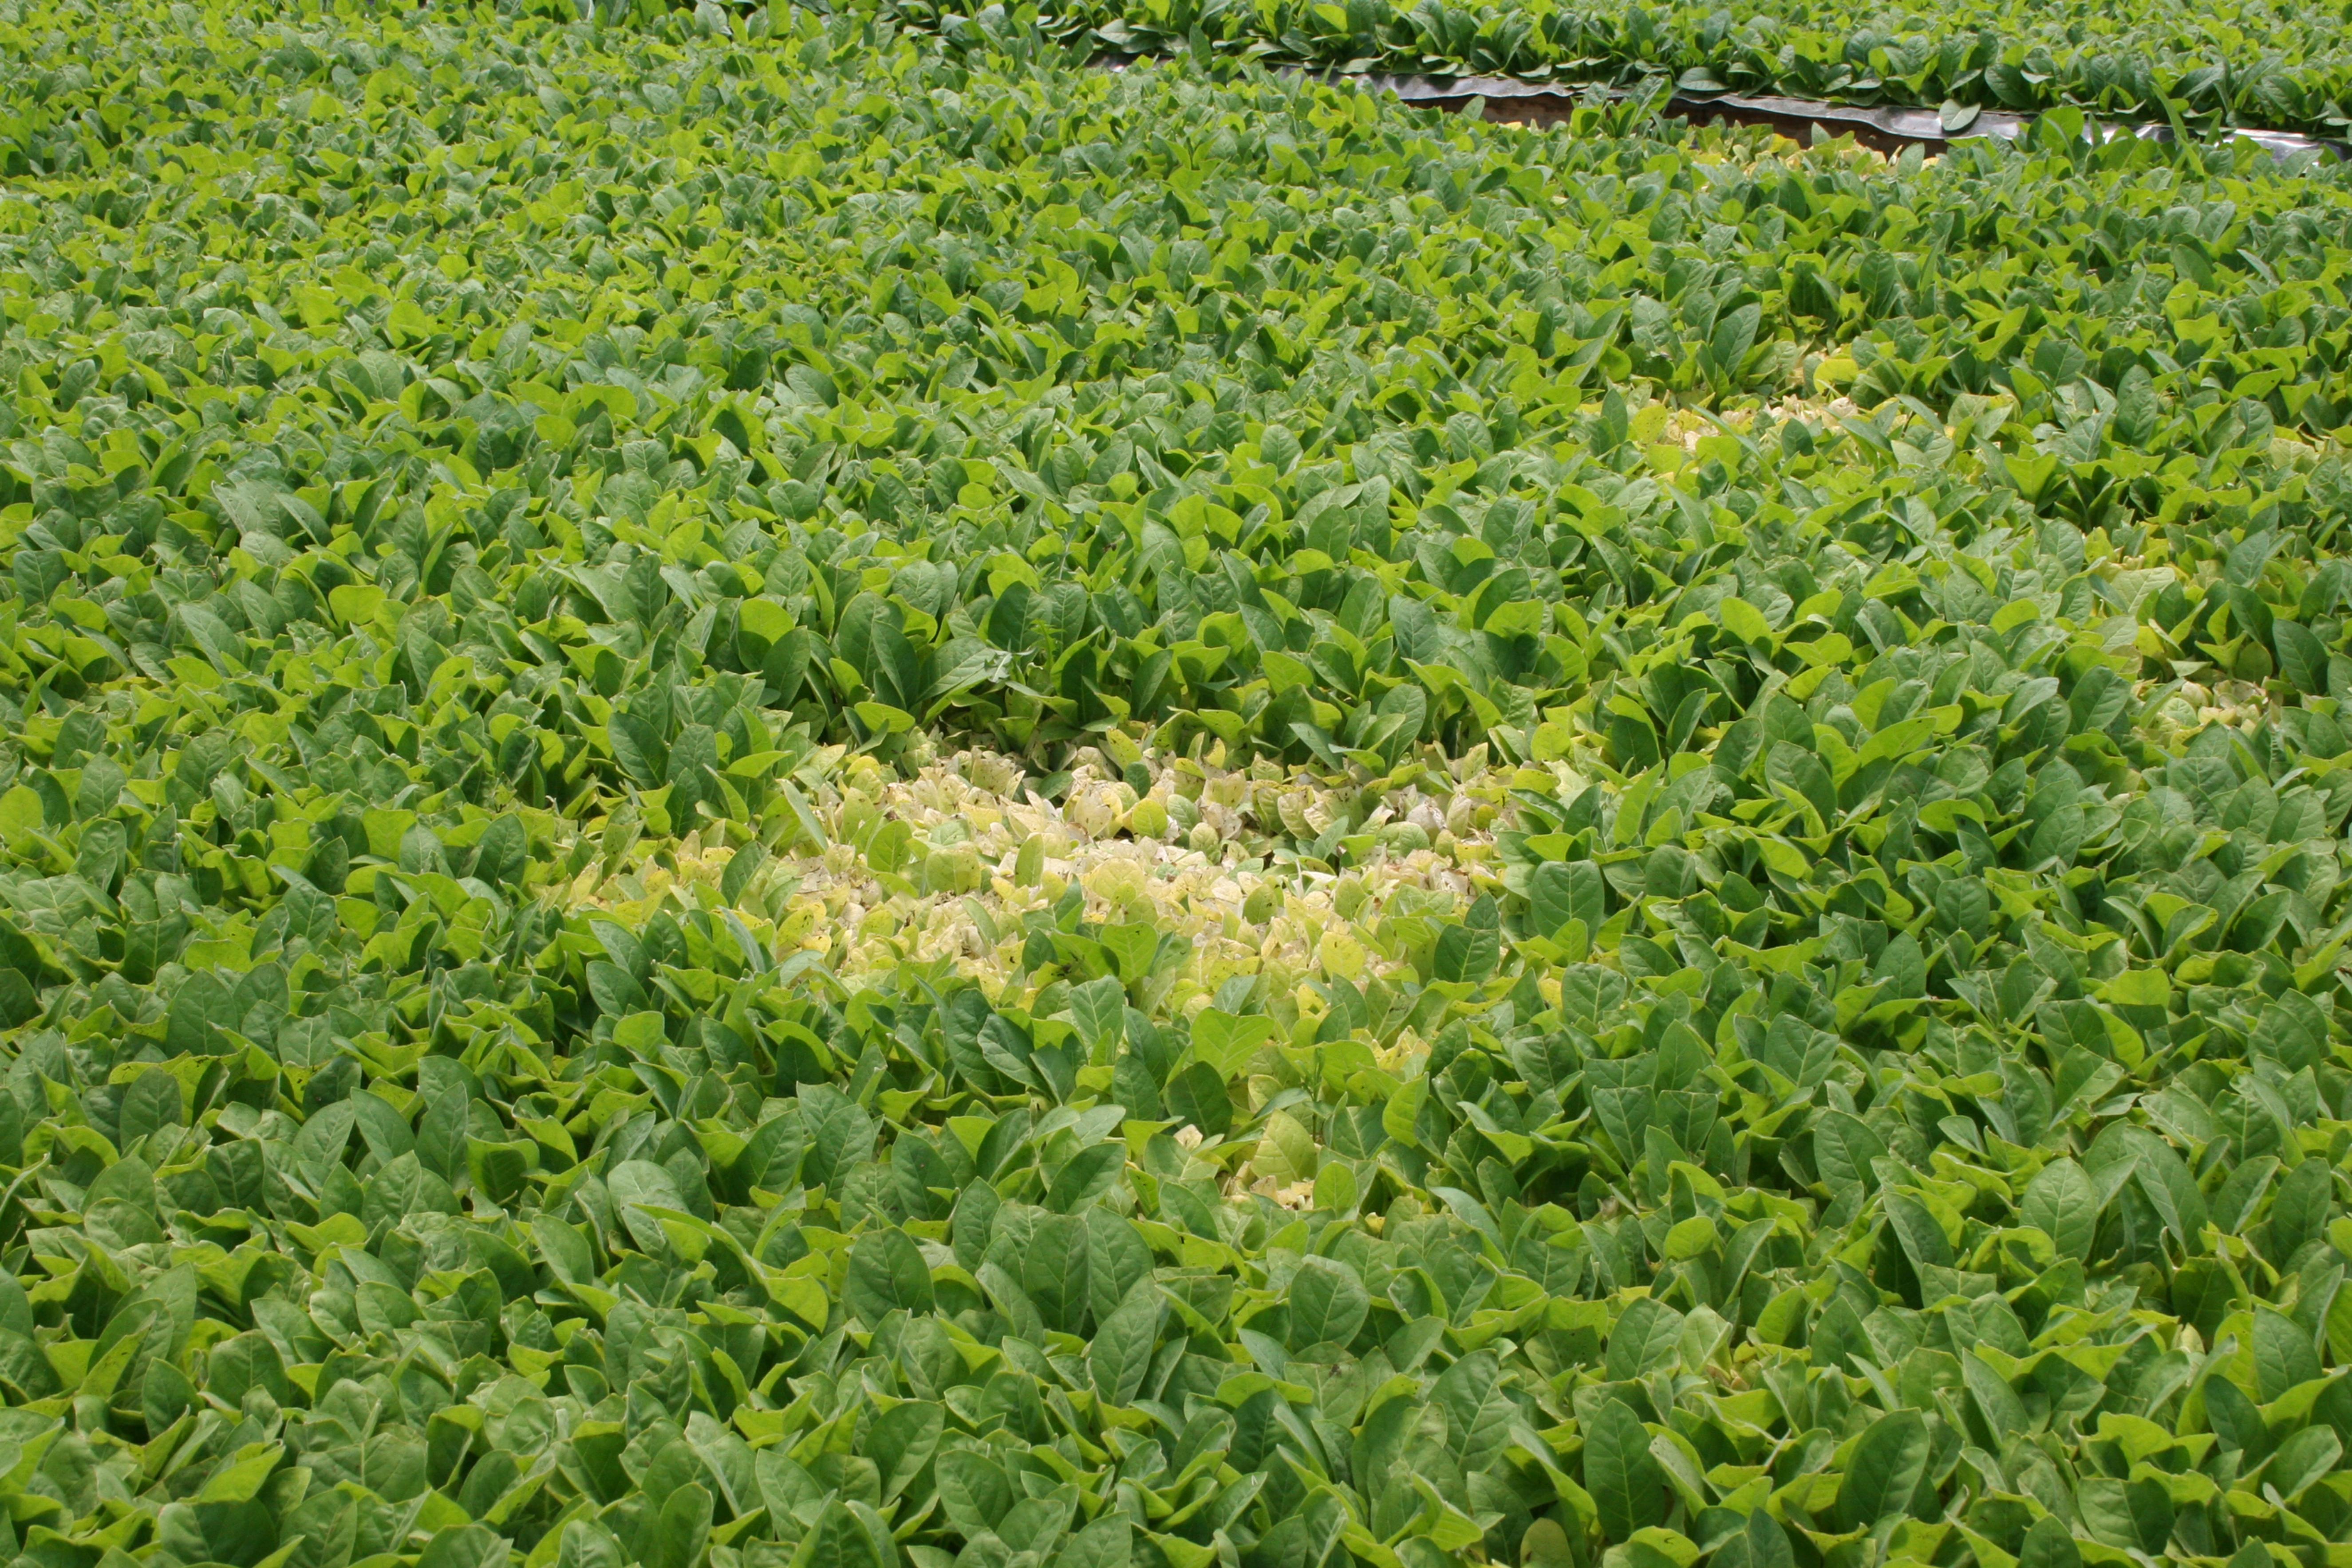 Pythium root rot is caused by a fungus-like organism often referred to as a water mold.  Pythium infections result in stunting and yellowing of tobacco seedlings.  Often infected plants are isolated in well-defined areas in float beds. (Photo: Kenneth Seebold, UK)